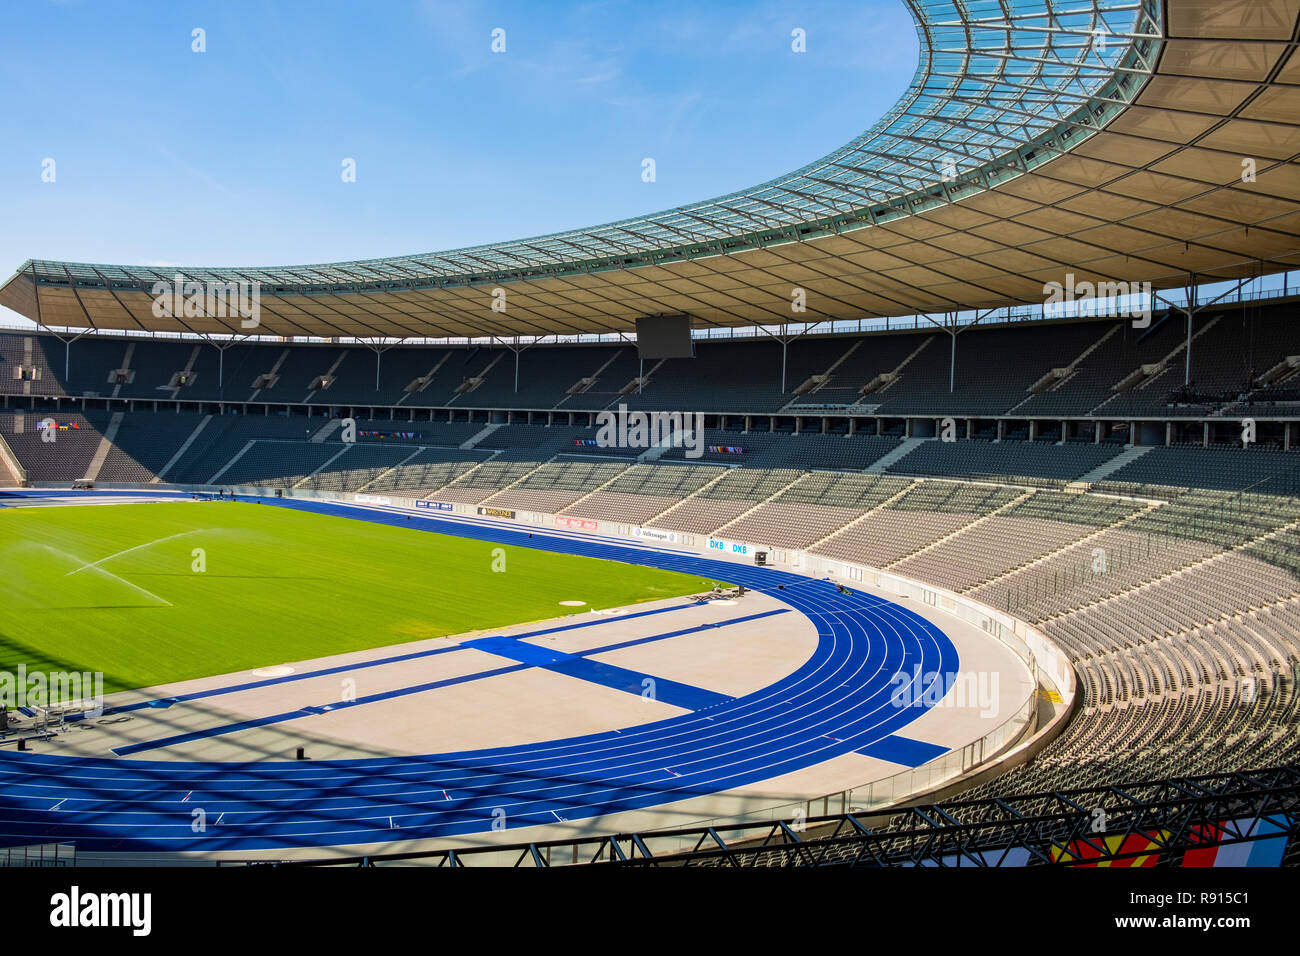 Berlin, Berlin state / Germany - 2018/07/31: Inner space of the historic Olympiastadion sports stadium originally constructed for the Summer Olympic i Stock Photo